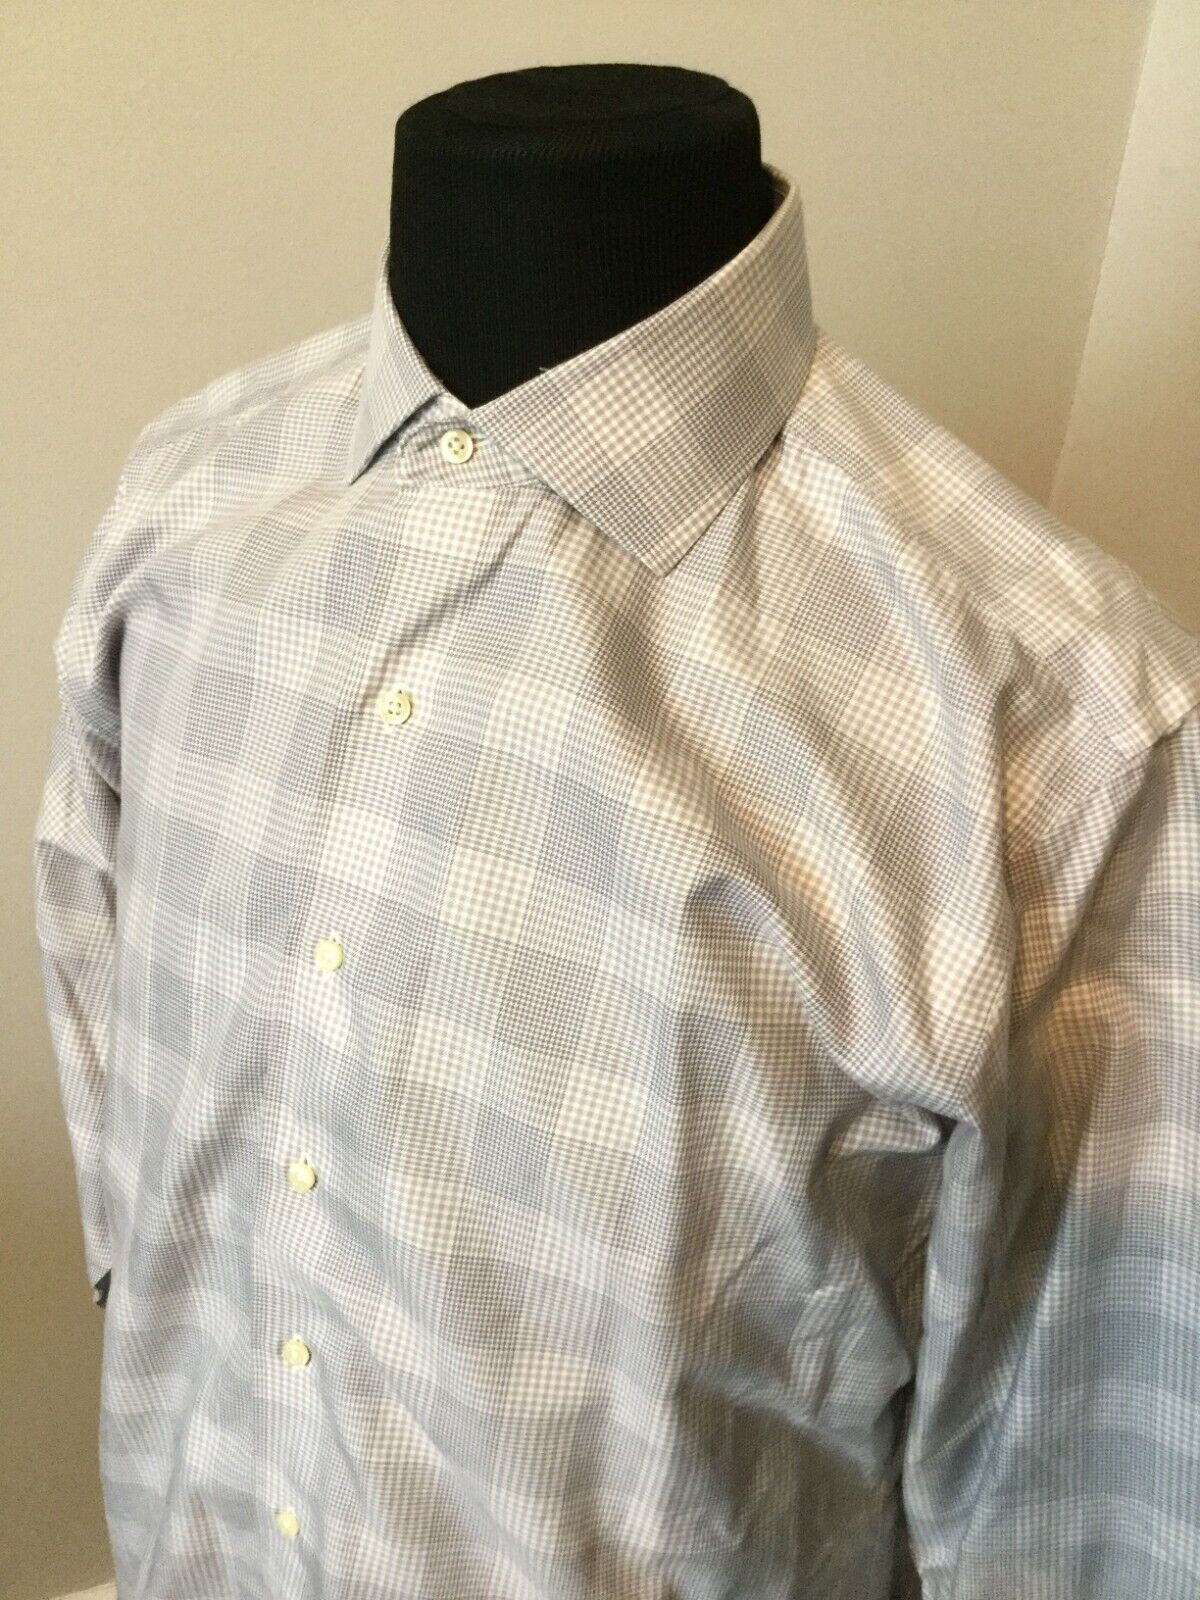 NWOT Brooks Brothers Supima Oxford Button Down 16.5-2/3 Regent Fit MSRP $140